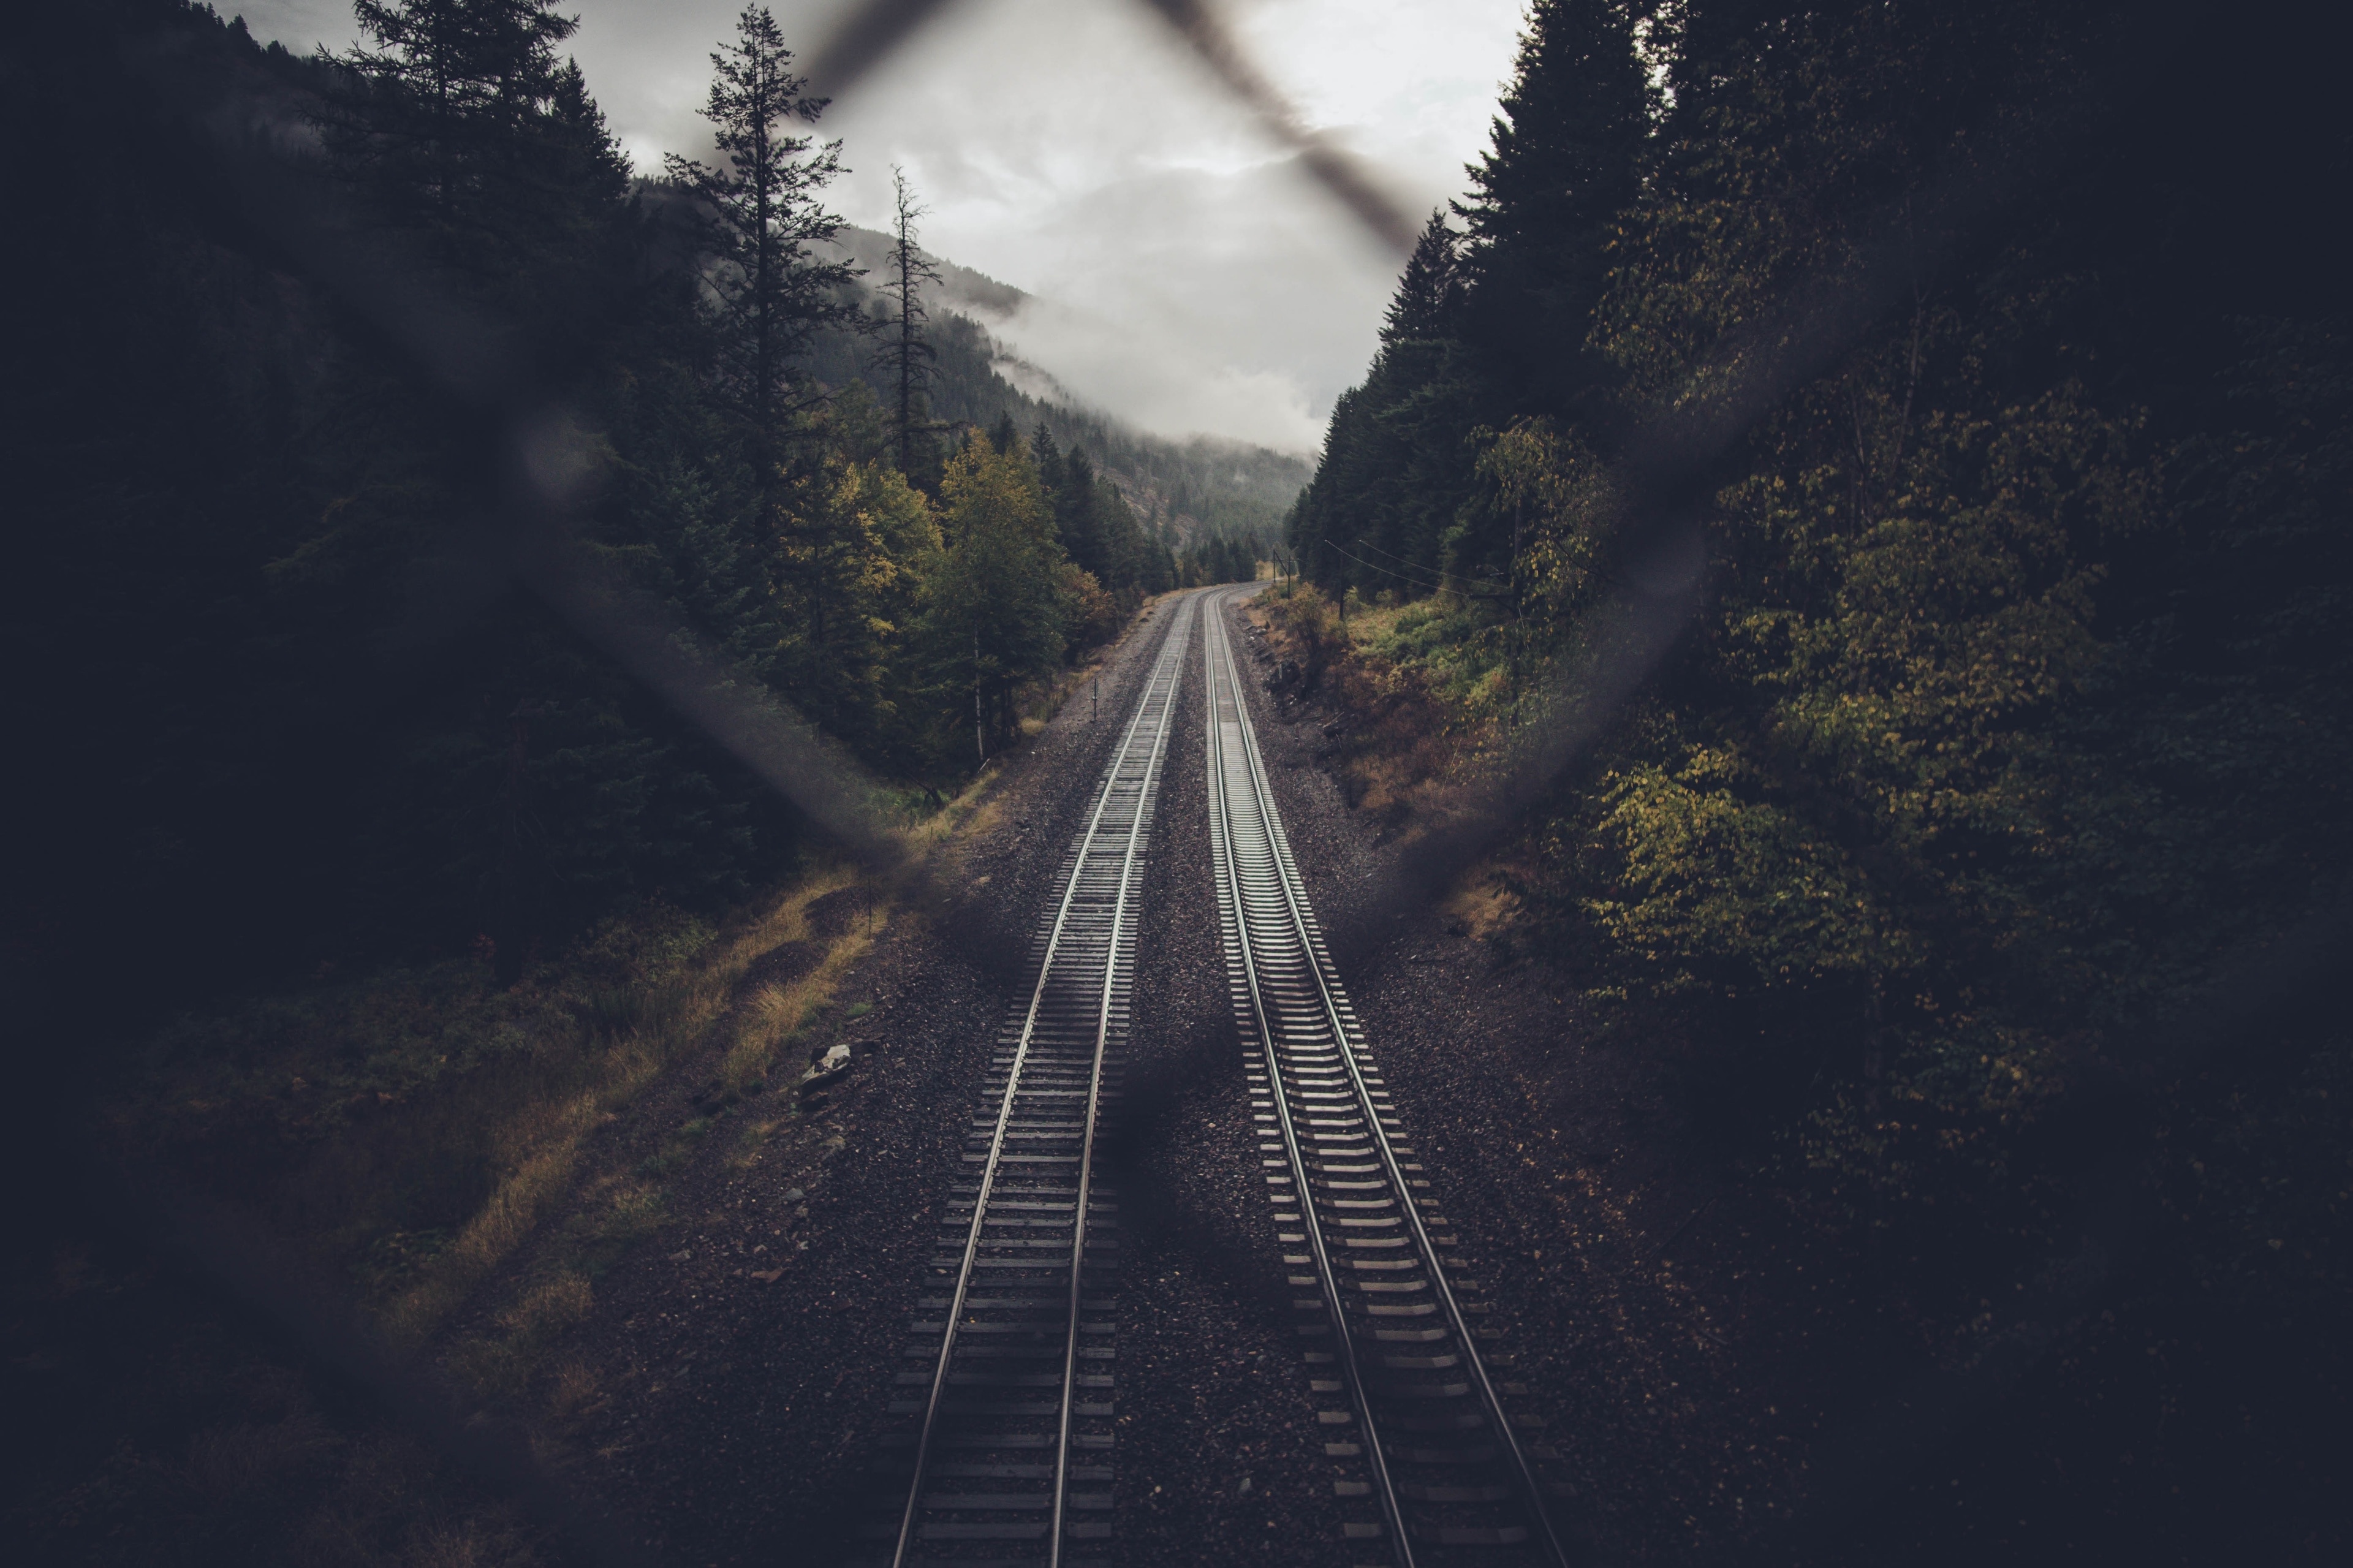 Follow the tracks or make your own? #Adventure